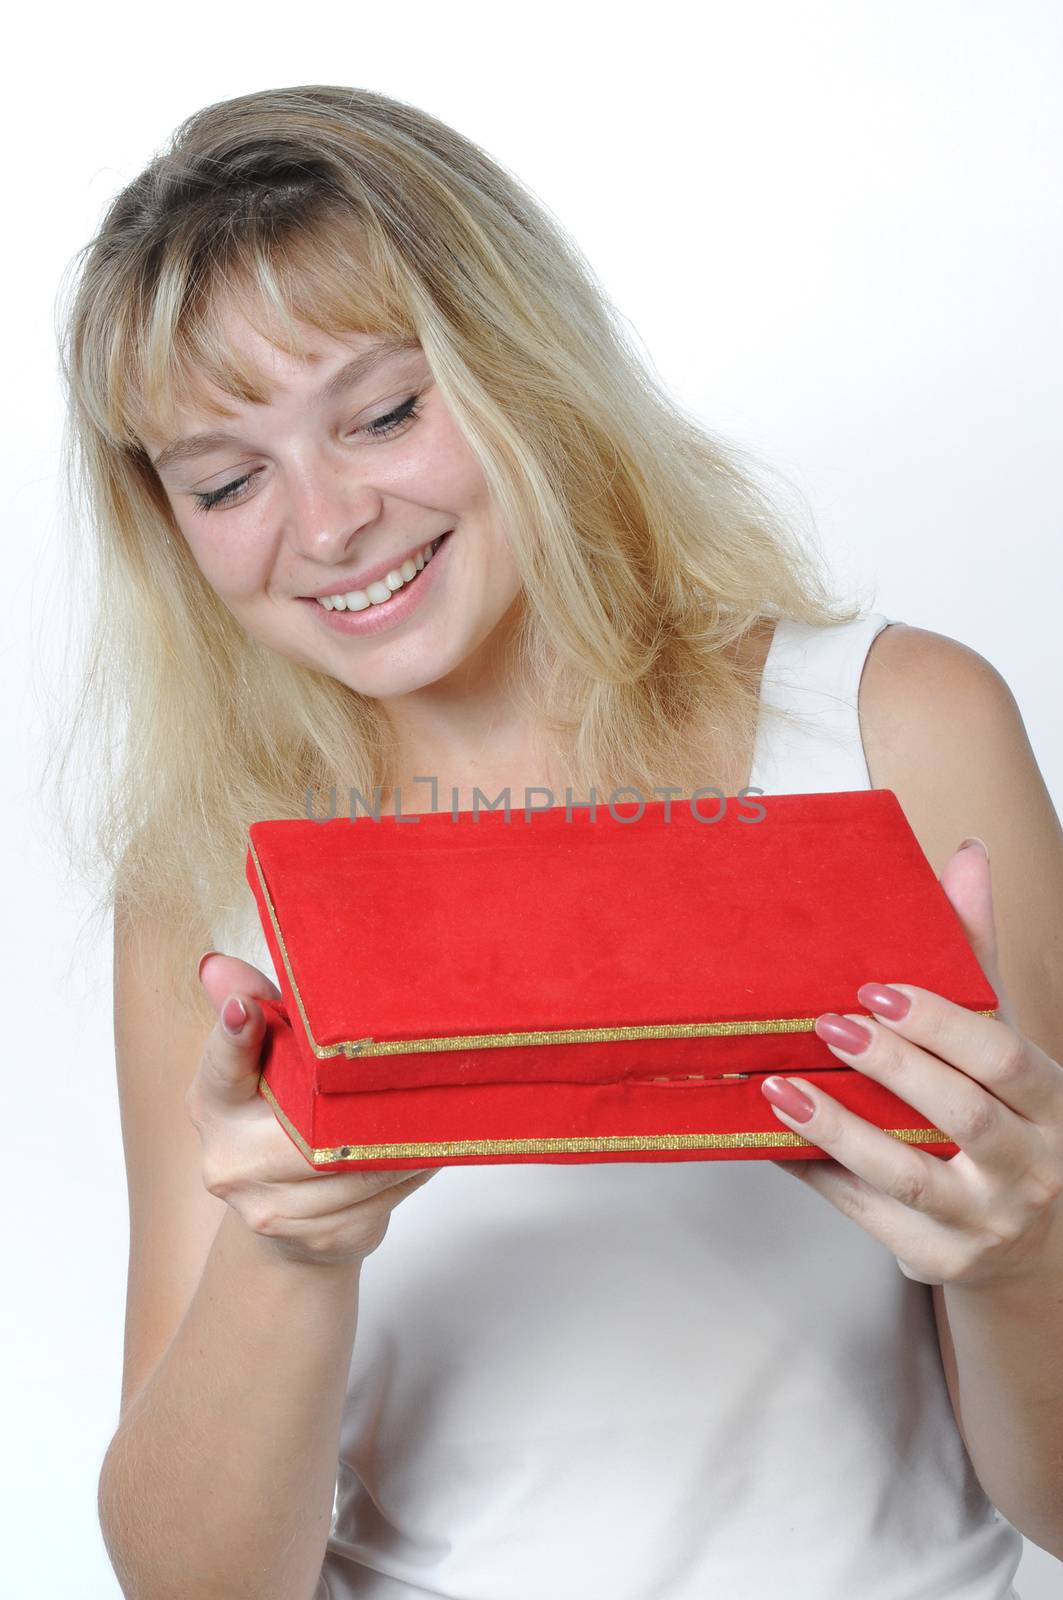  Beautiful woman astonished with the surprise inside of the red box